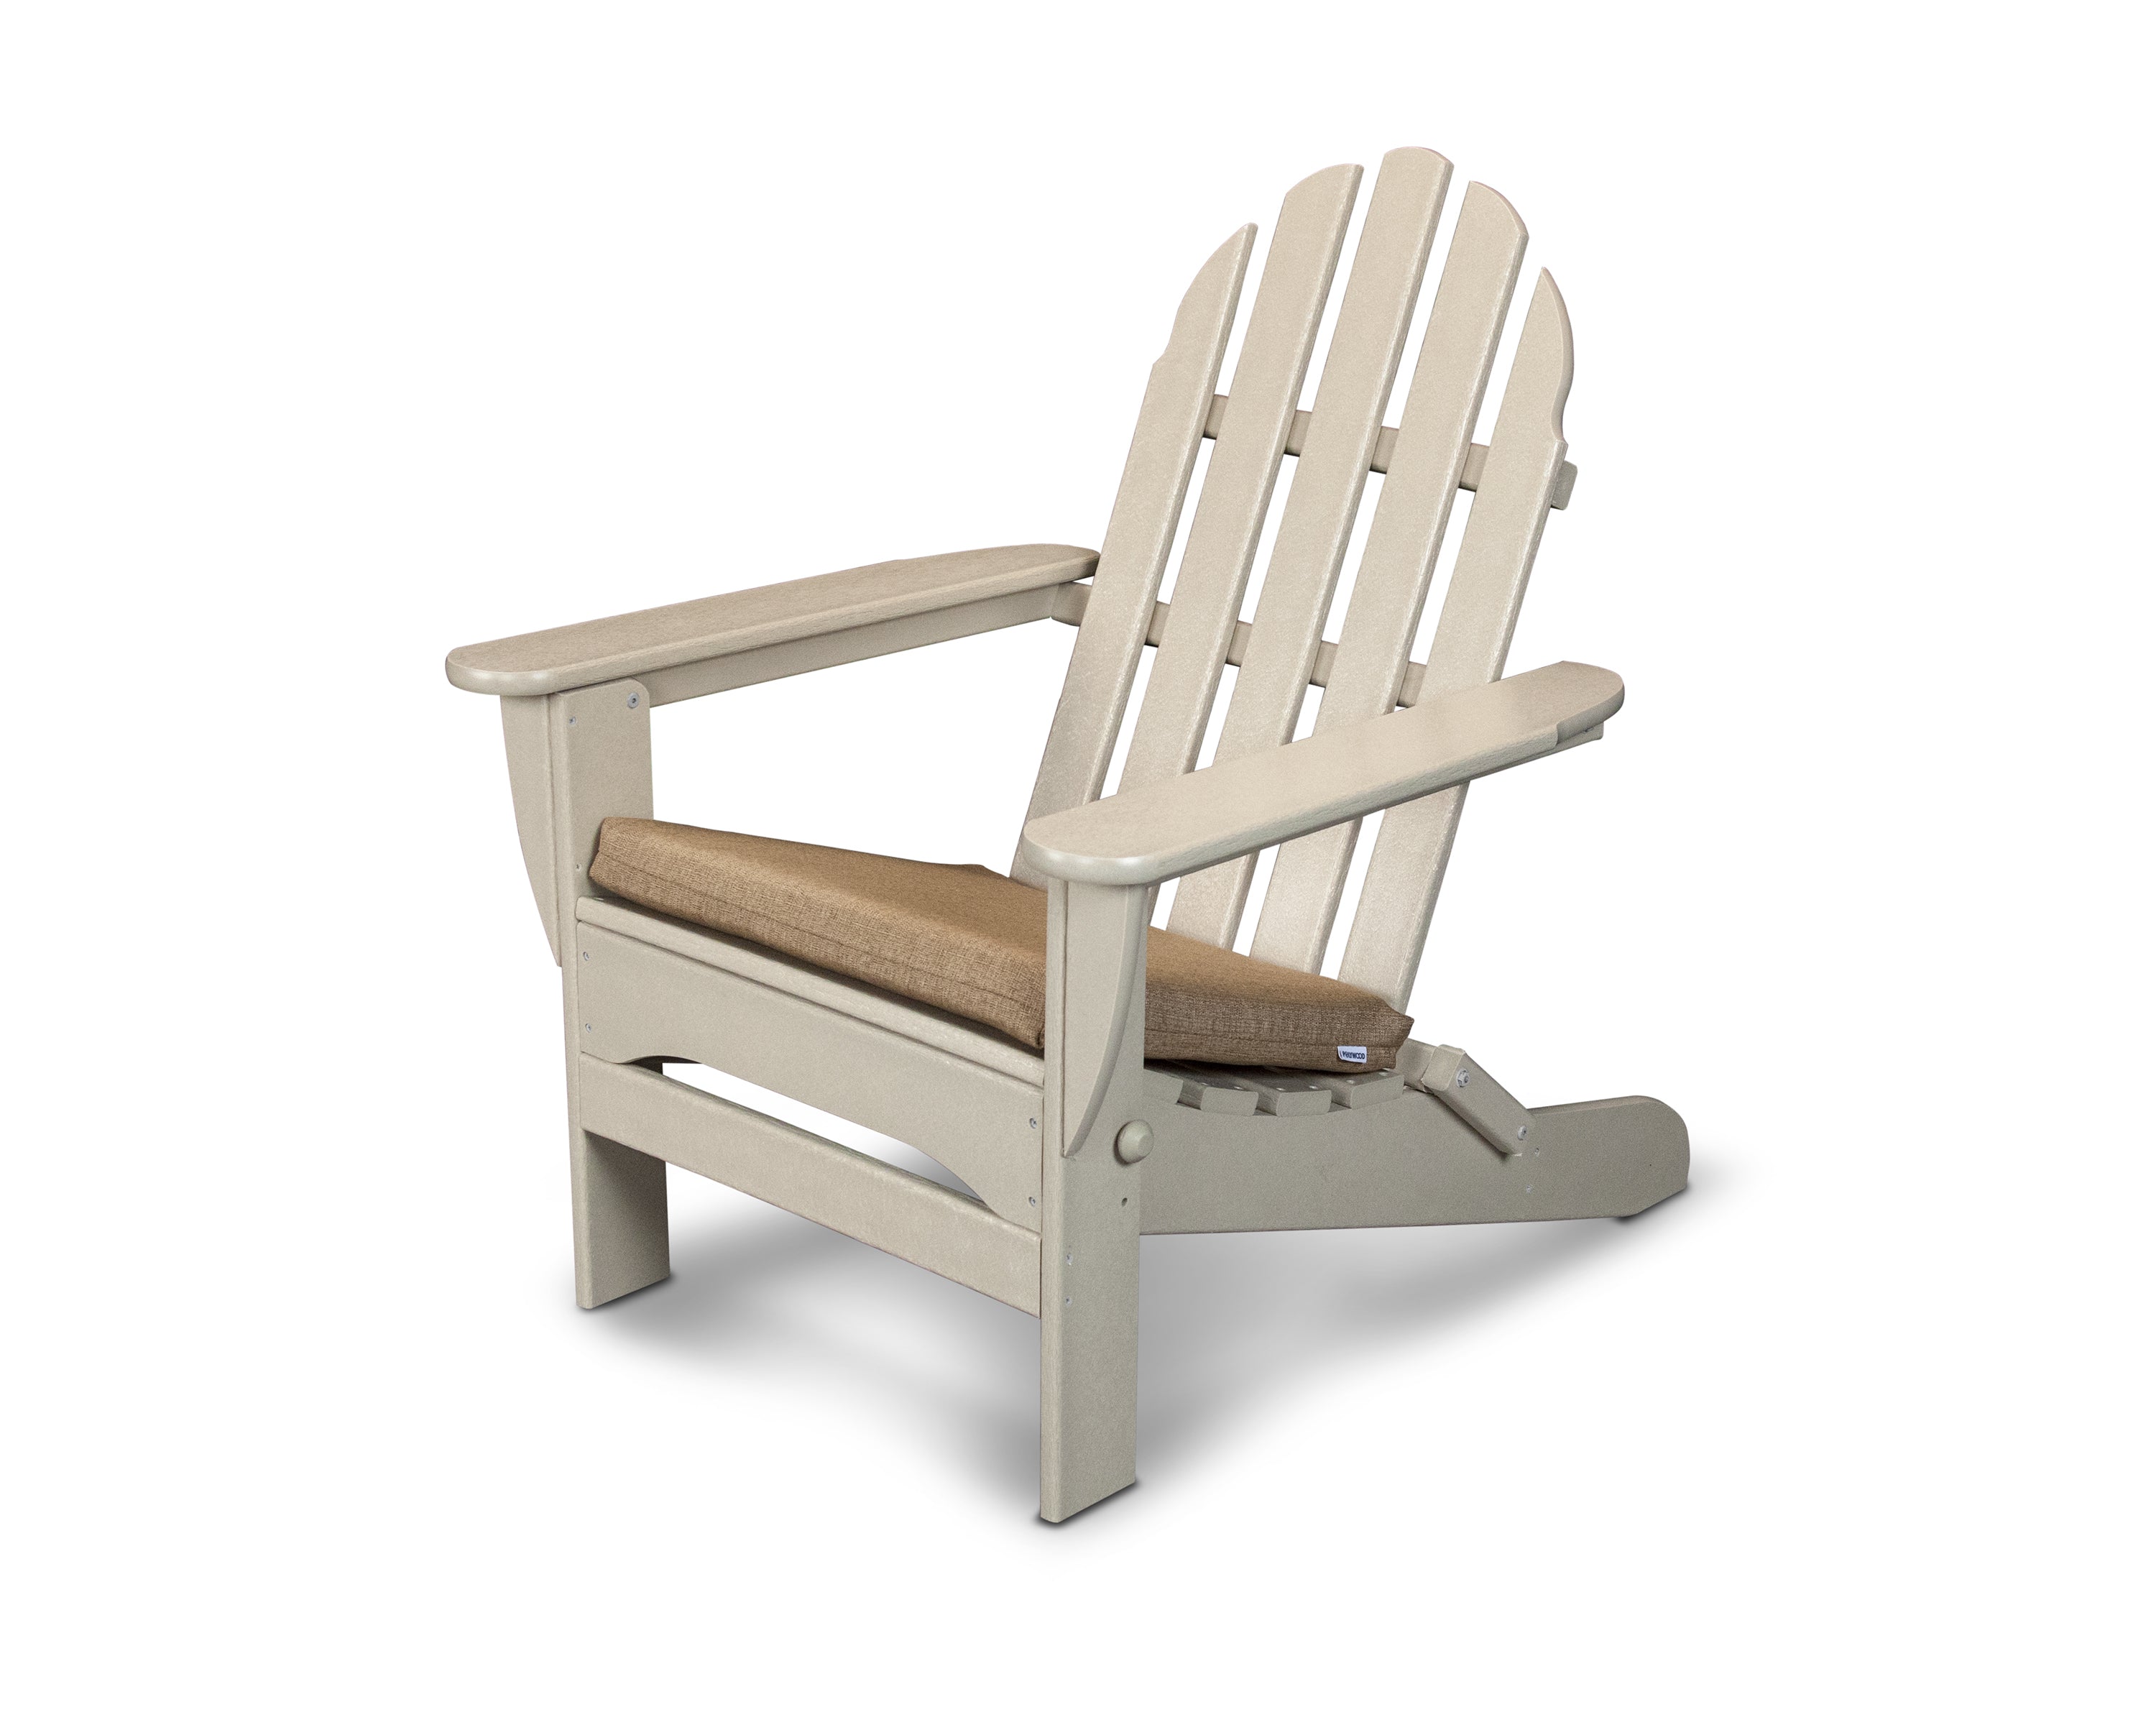 POLYWOOD Adirondack Chair with Seat Cushion in Sand / Sesame